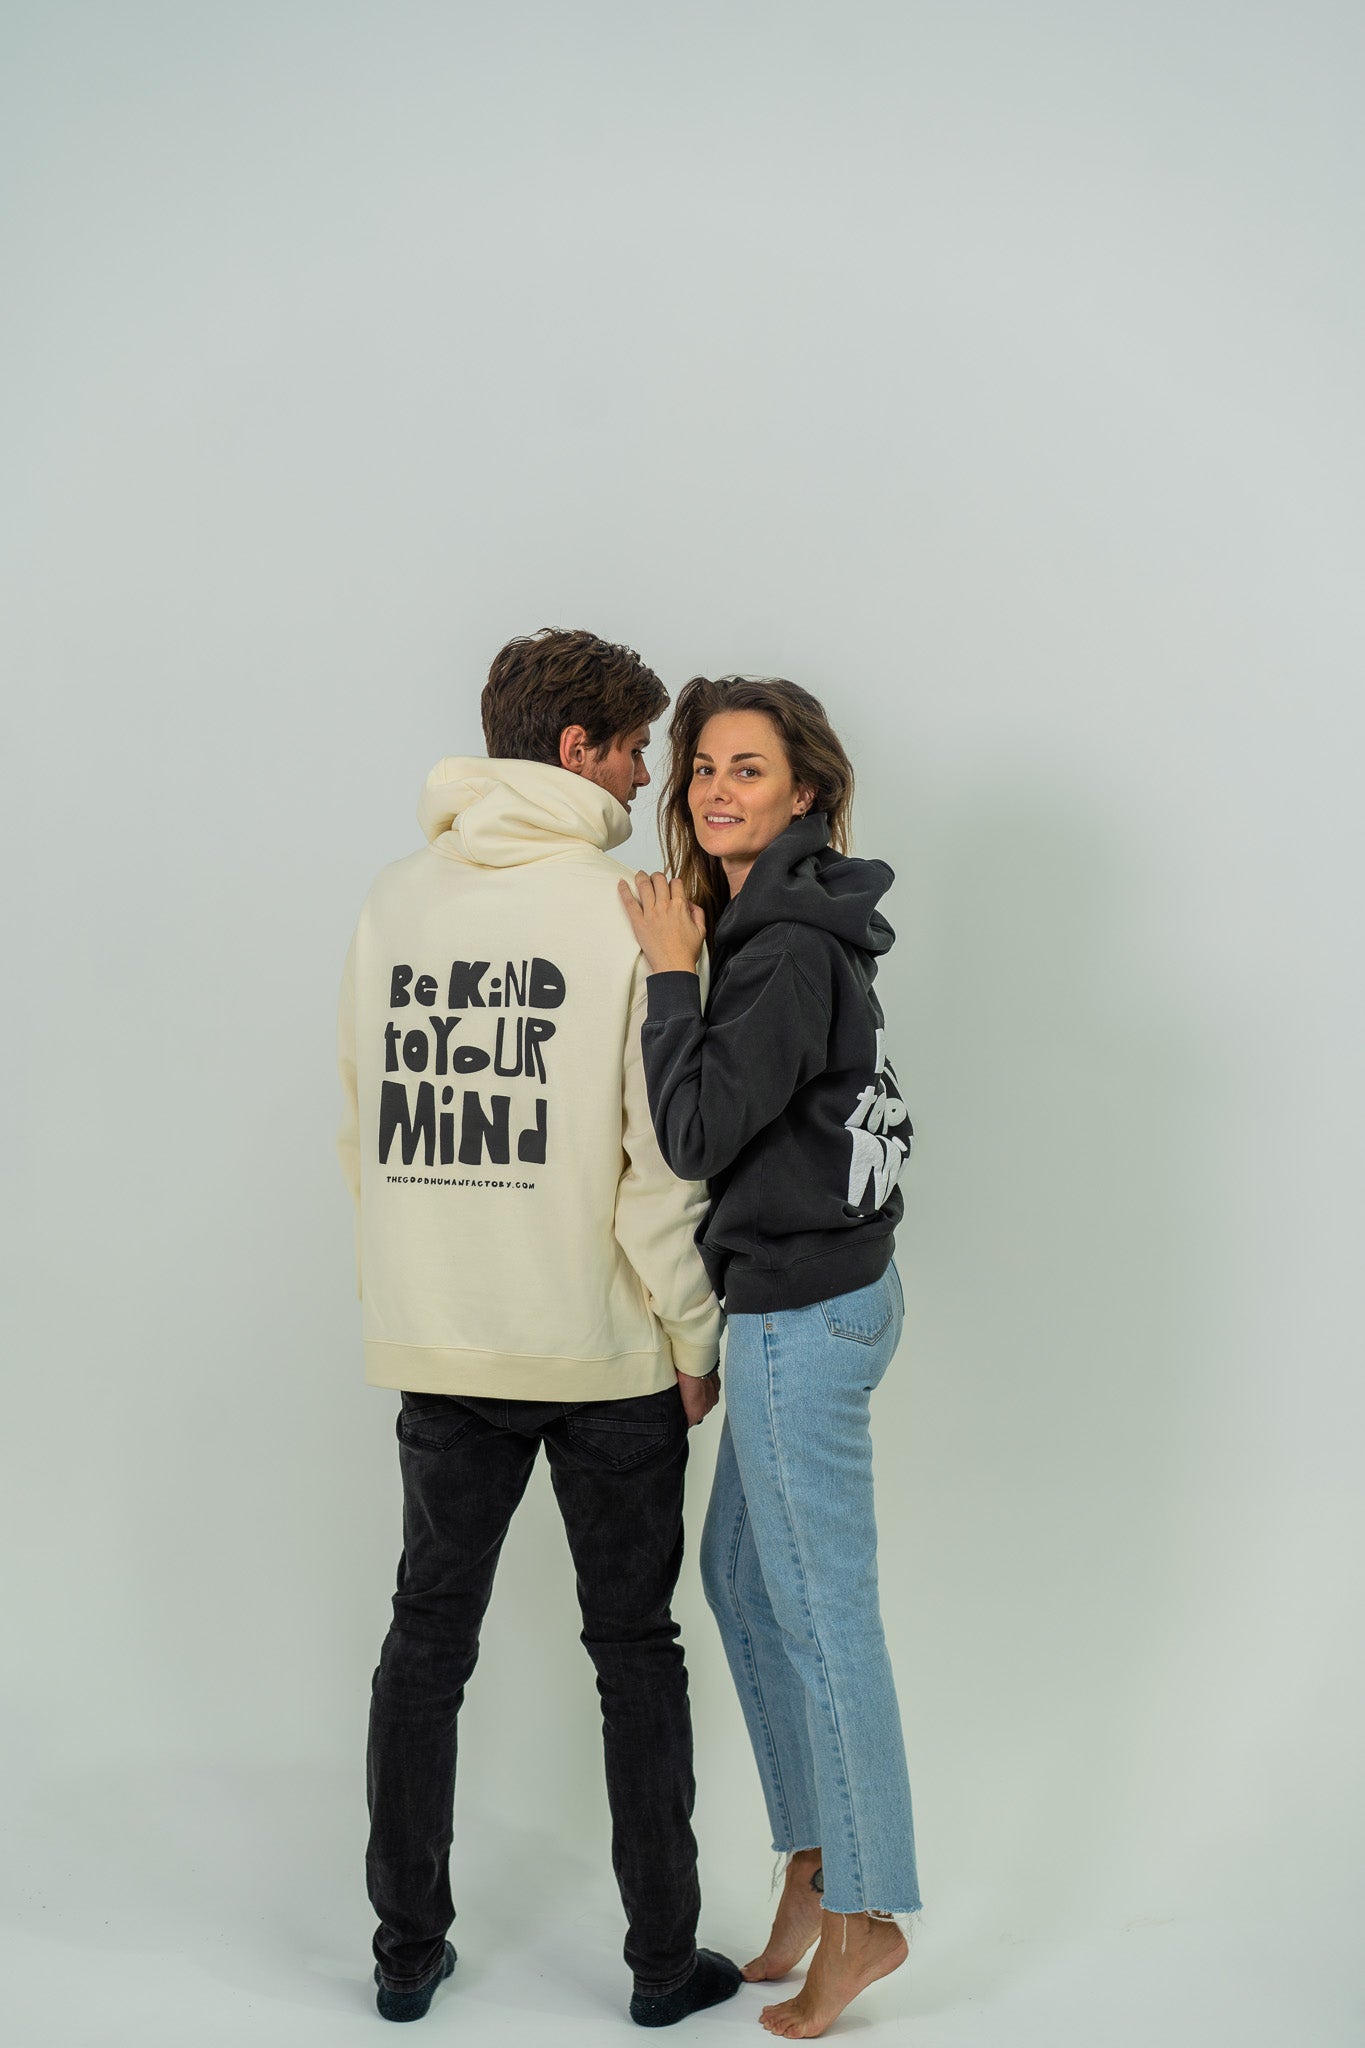 Unisex Be Kind To Your Mind Hoodie - The Good Human Factory